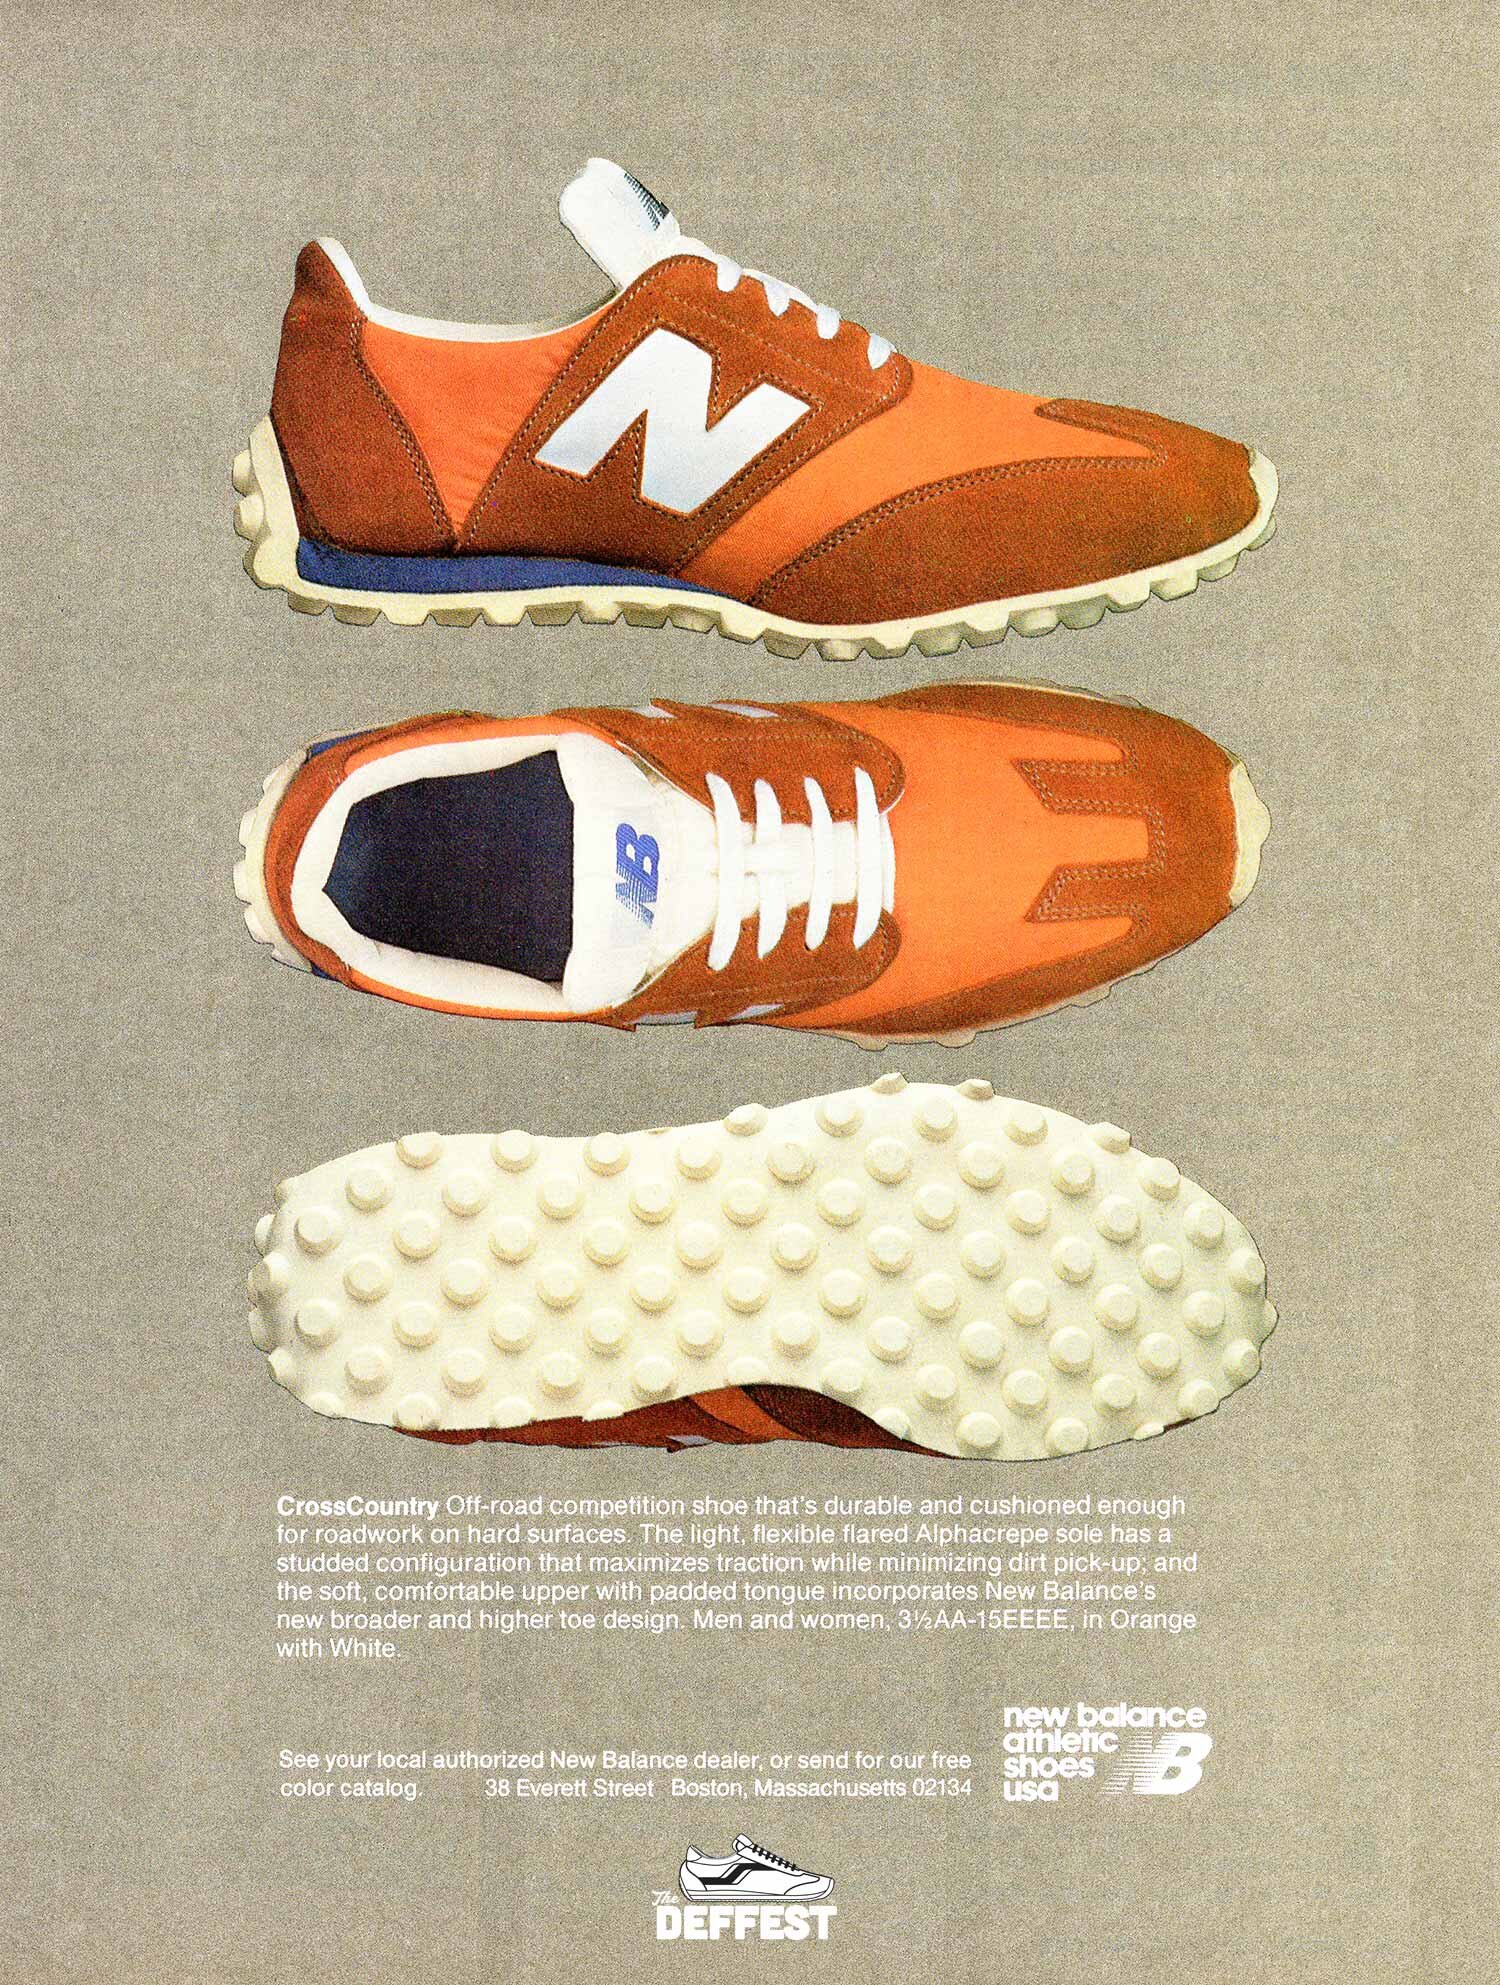 Inseguro recuperar ensayo The Deffest®. A vintage and retro sneaker blog. — Vintage New Balance  CrossCountry runners from 1978